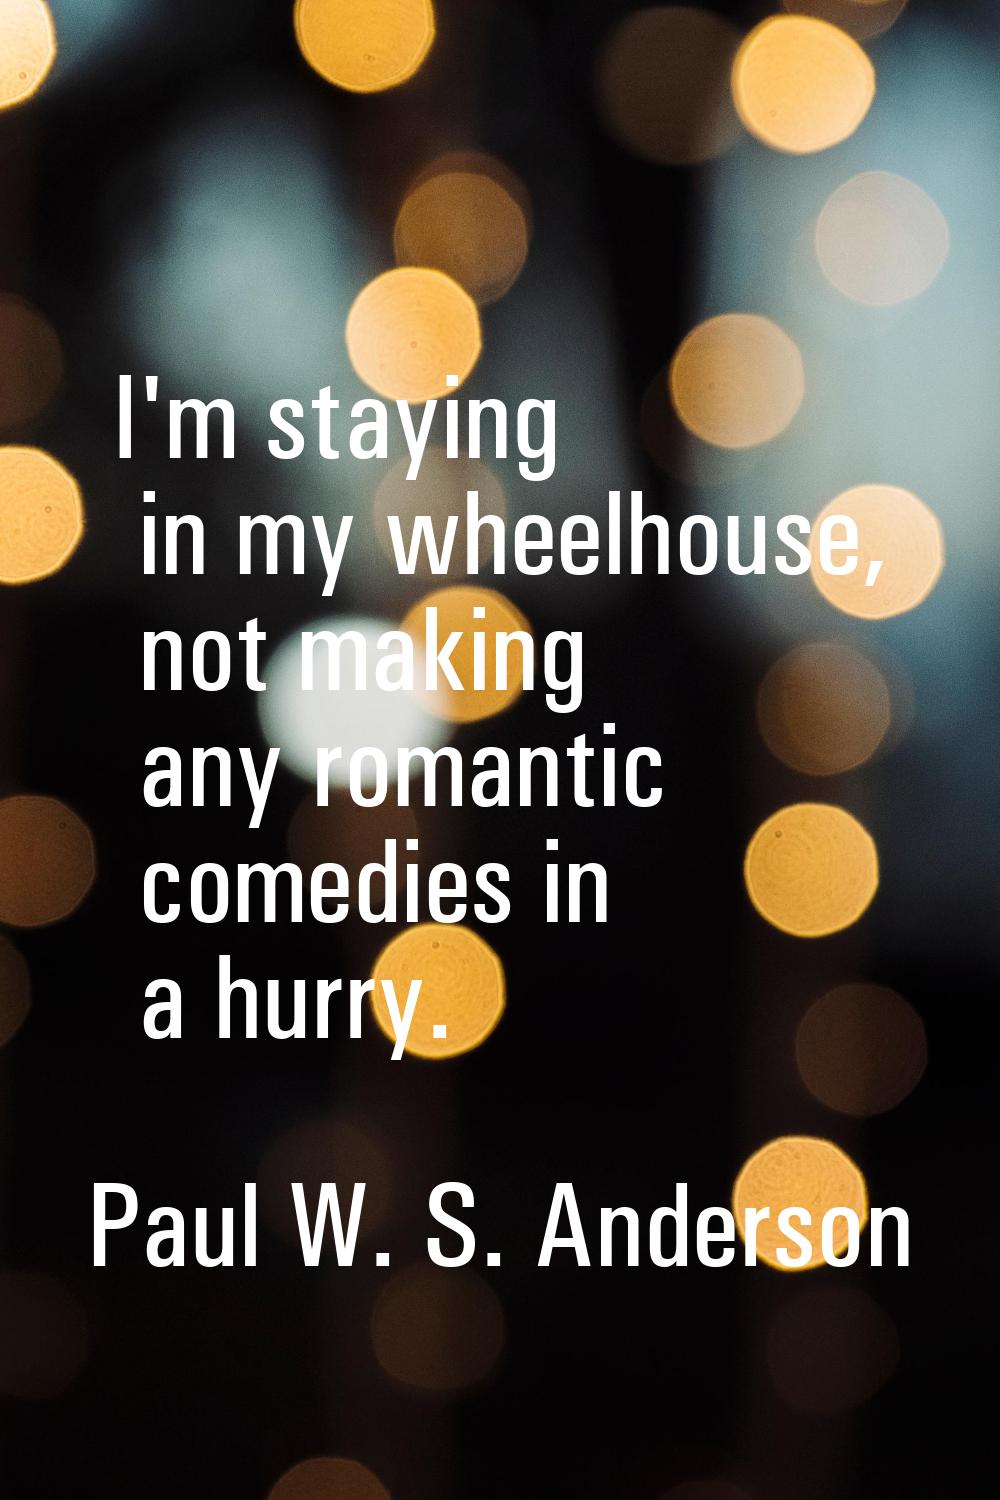 I'm staying in my wheelhouse, not making any romantic comedies in a hurry.